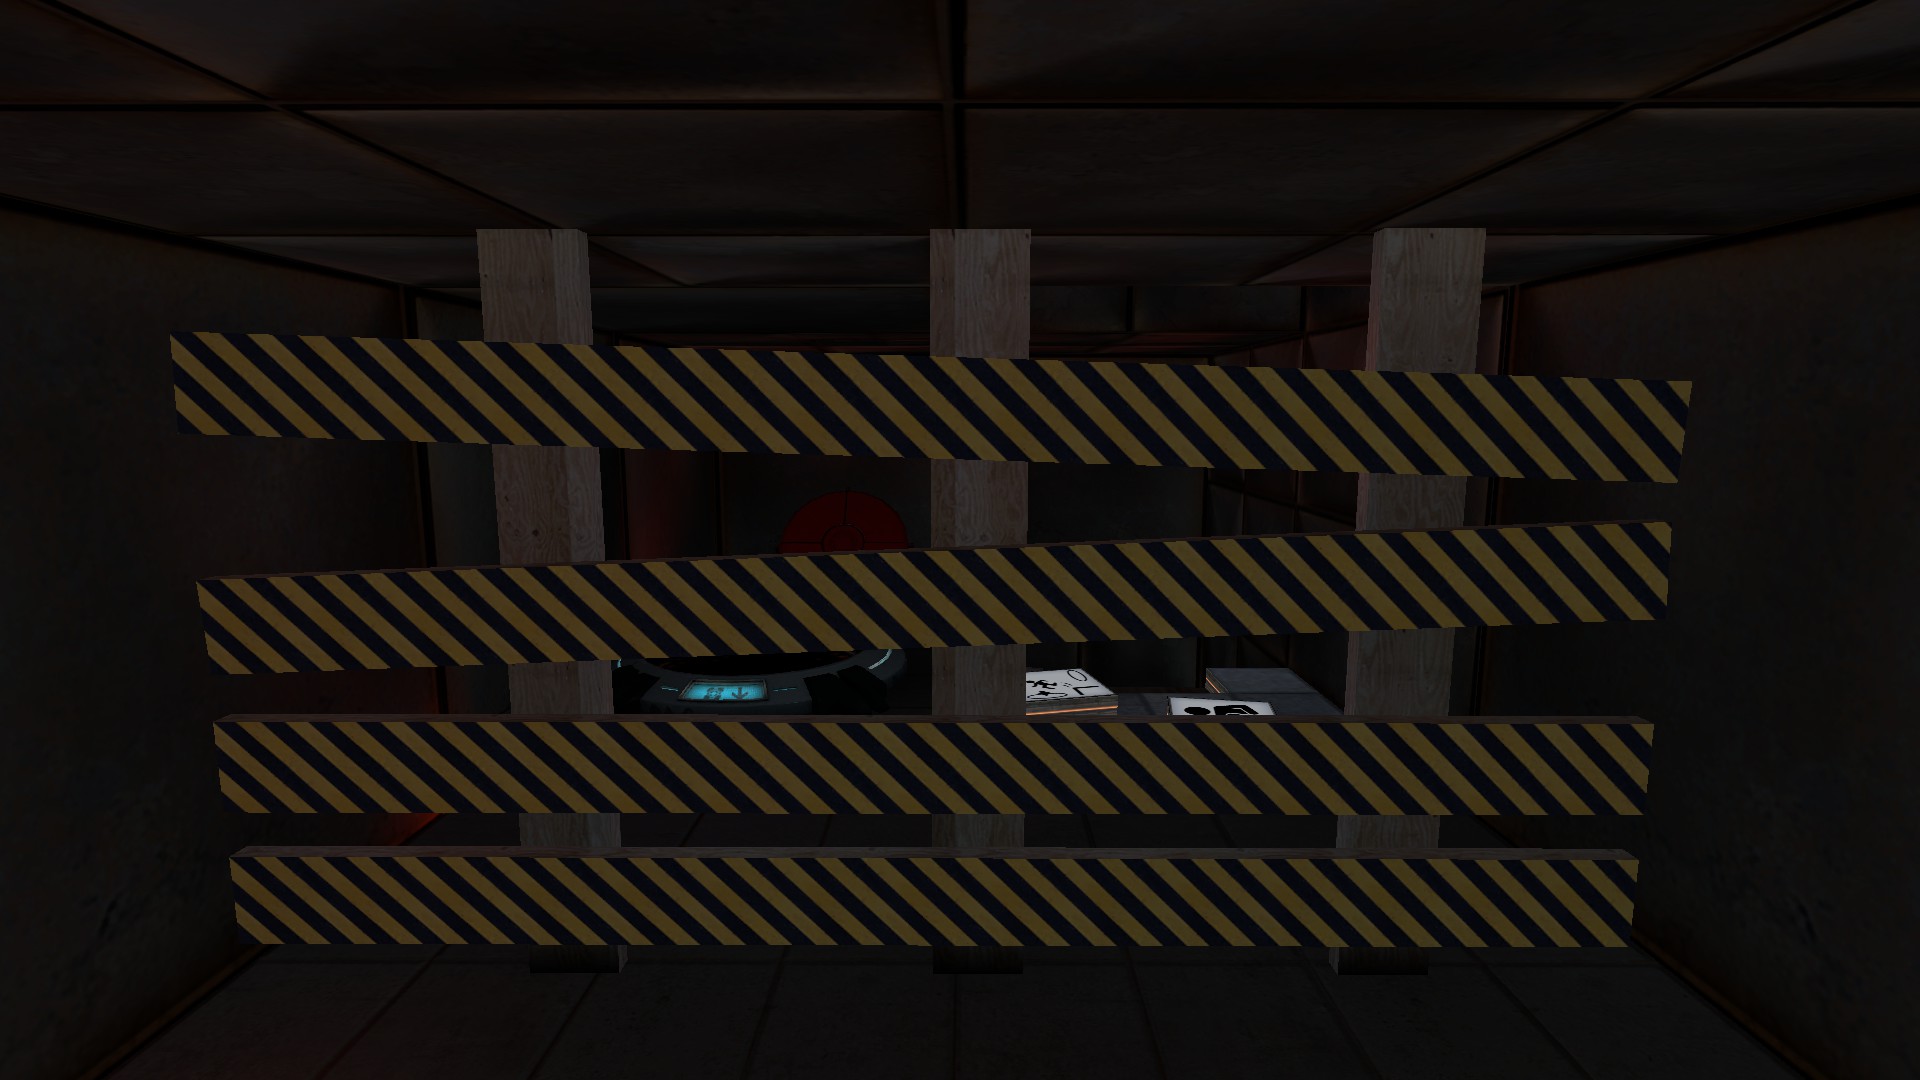 A test chamber under construction is blocked off by a caution barrier.